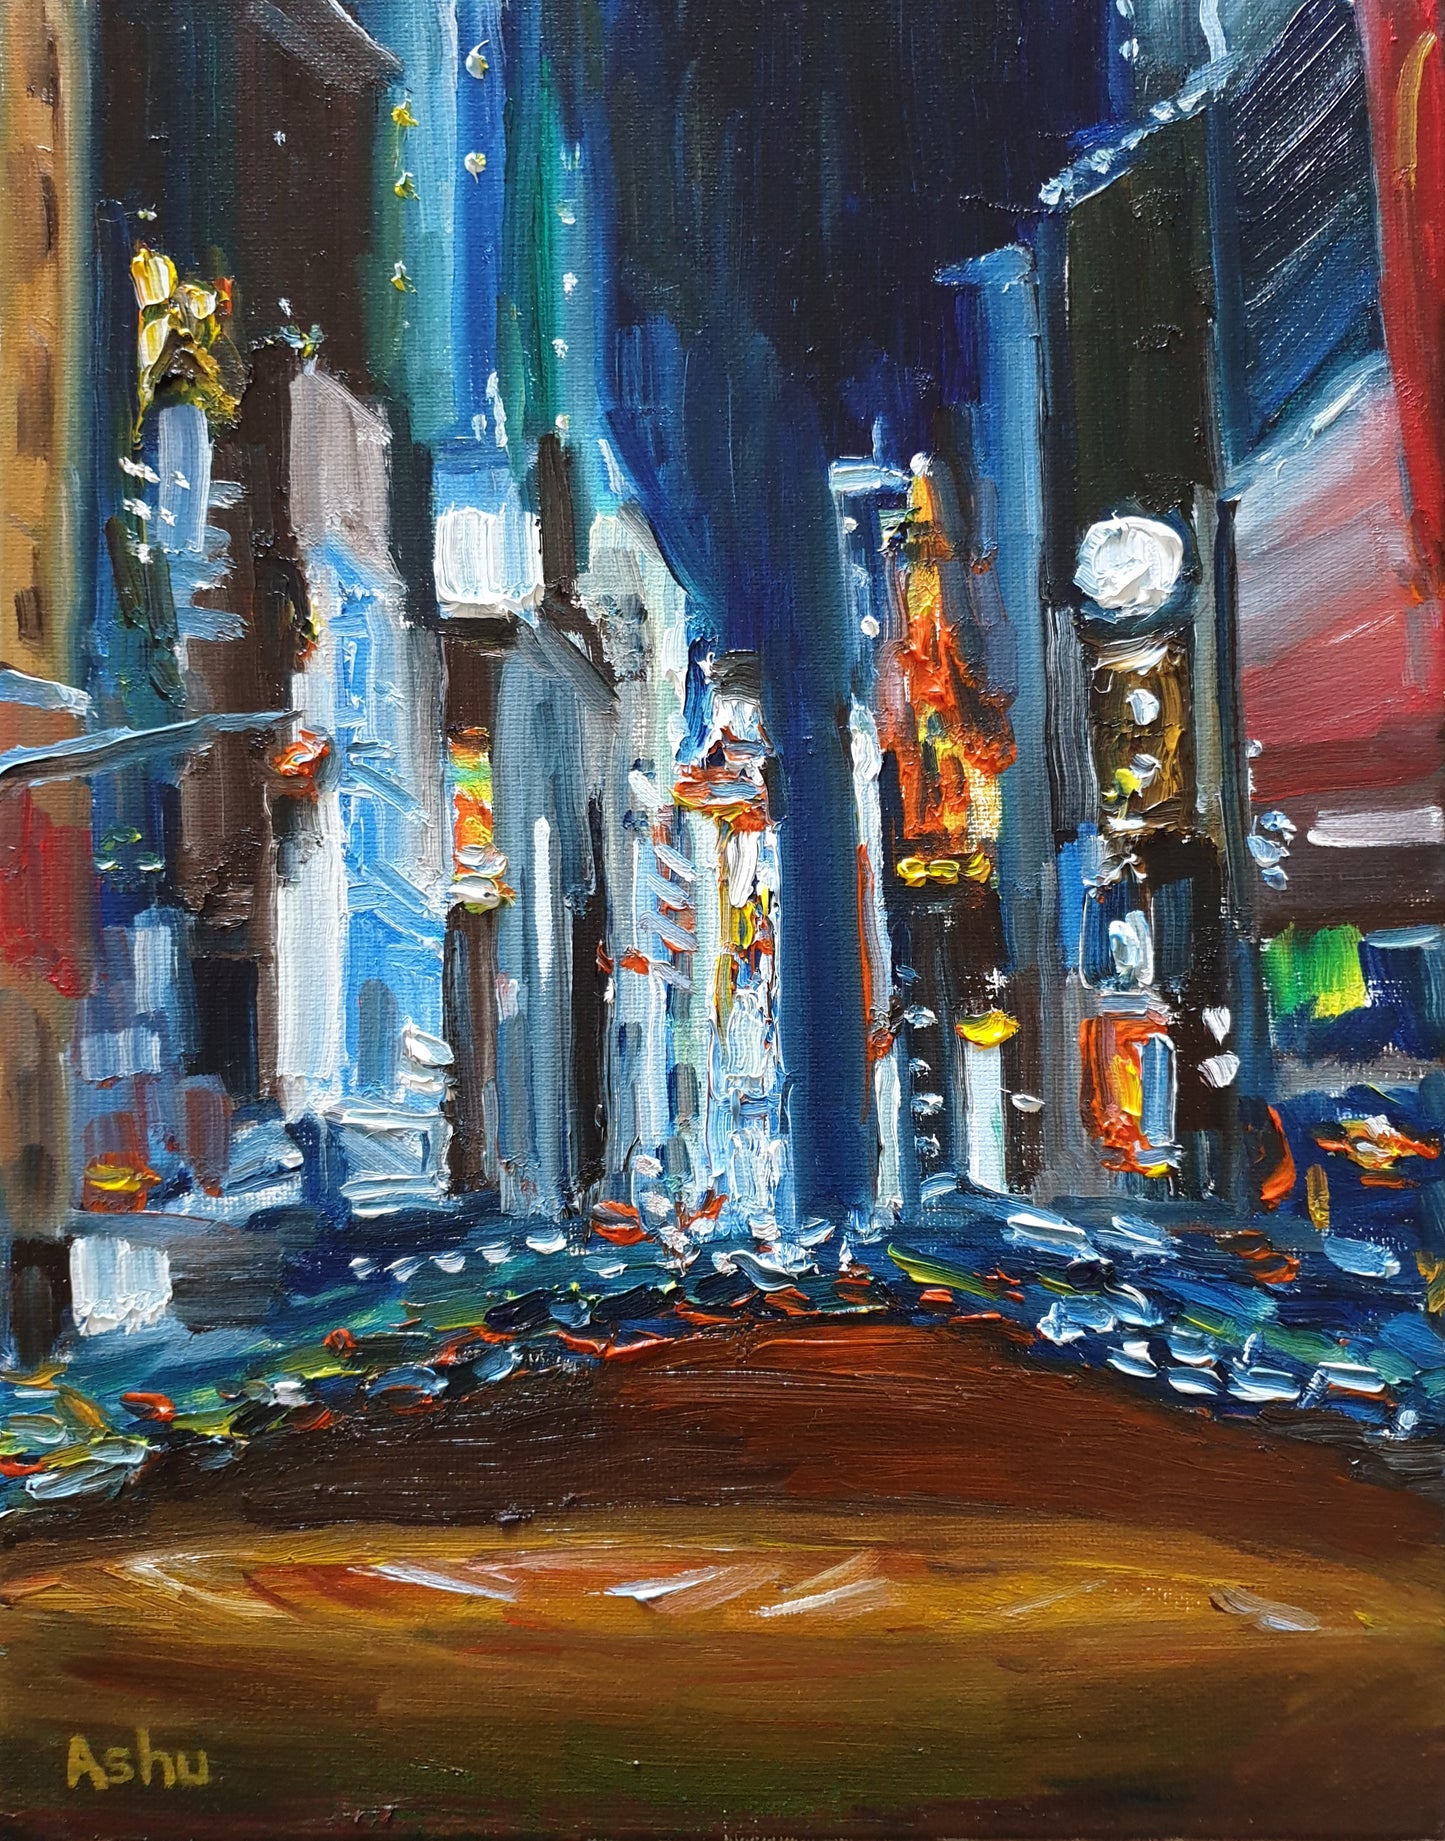 #Midnight Ride in Times Square - Ashu's Art